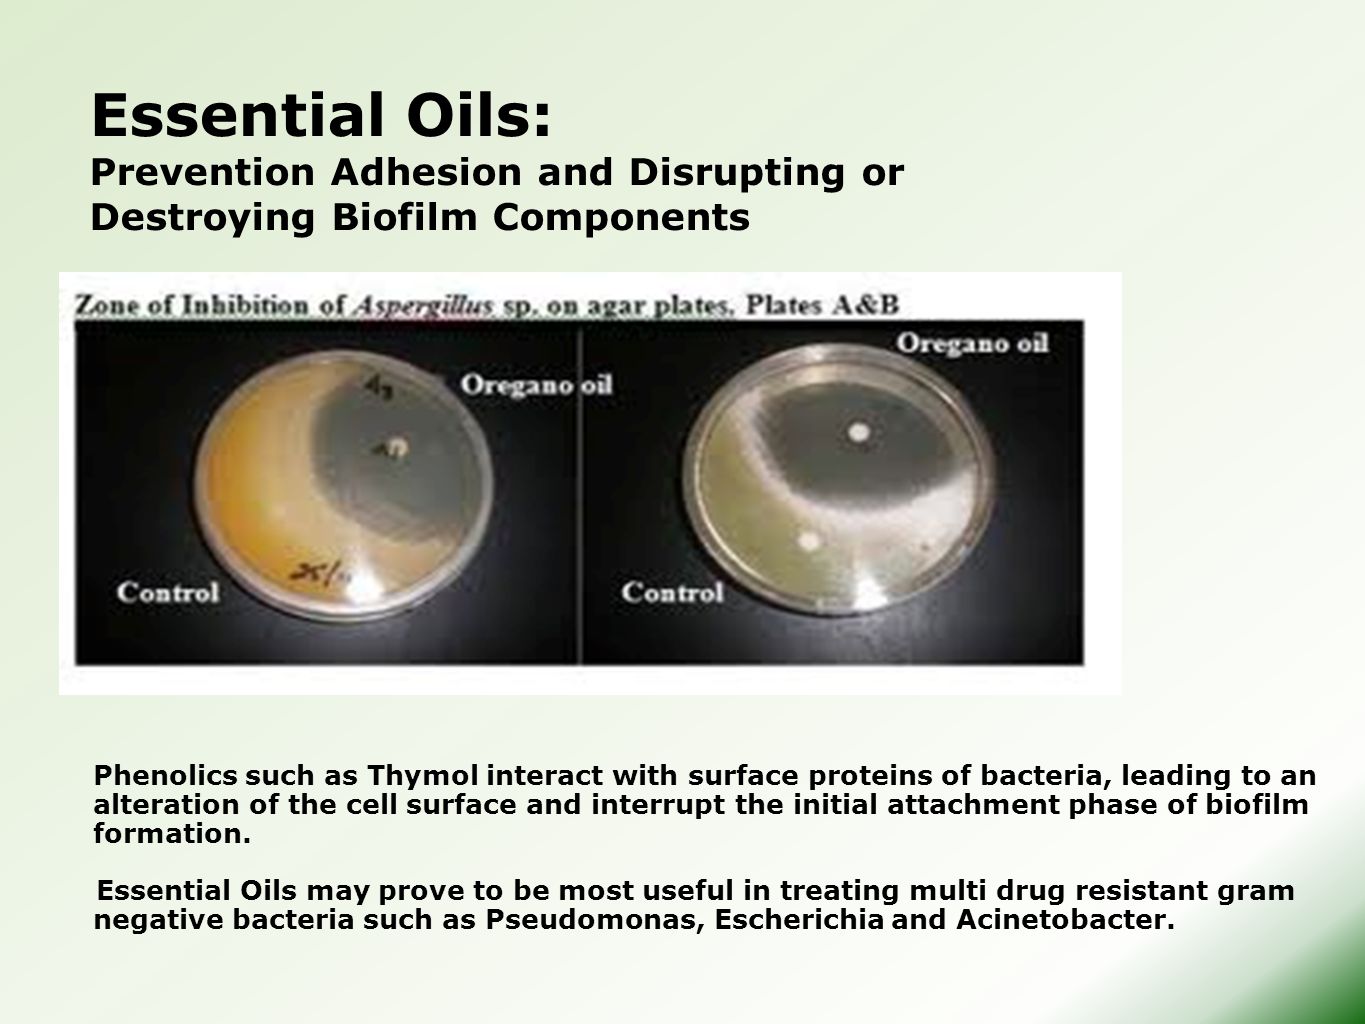 Essential+Oils:+Prevention+Adhesion+and+Disrupting+or+Destroying+Biofilm+Components..jpg